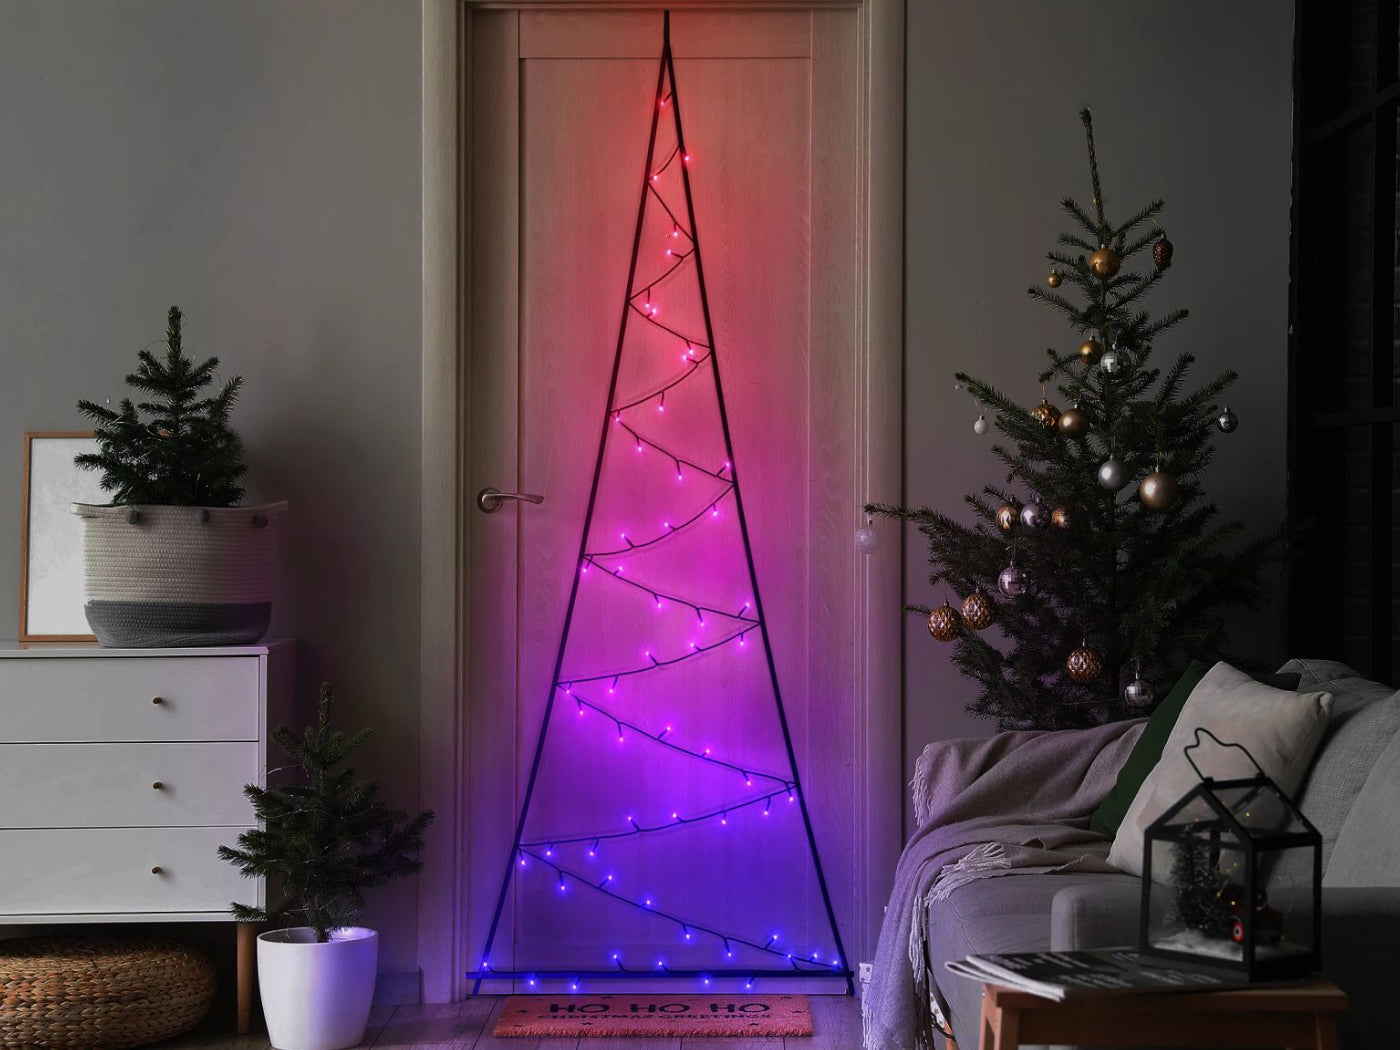 Christmas lighting ideas to decorate small spaces